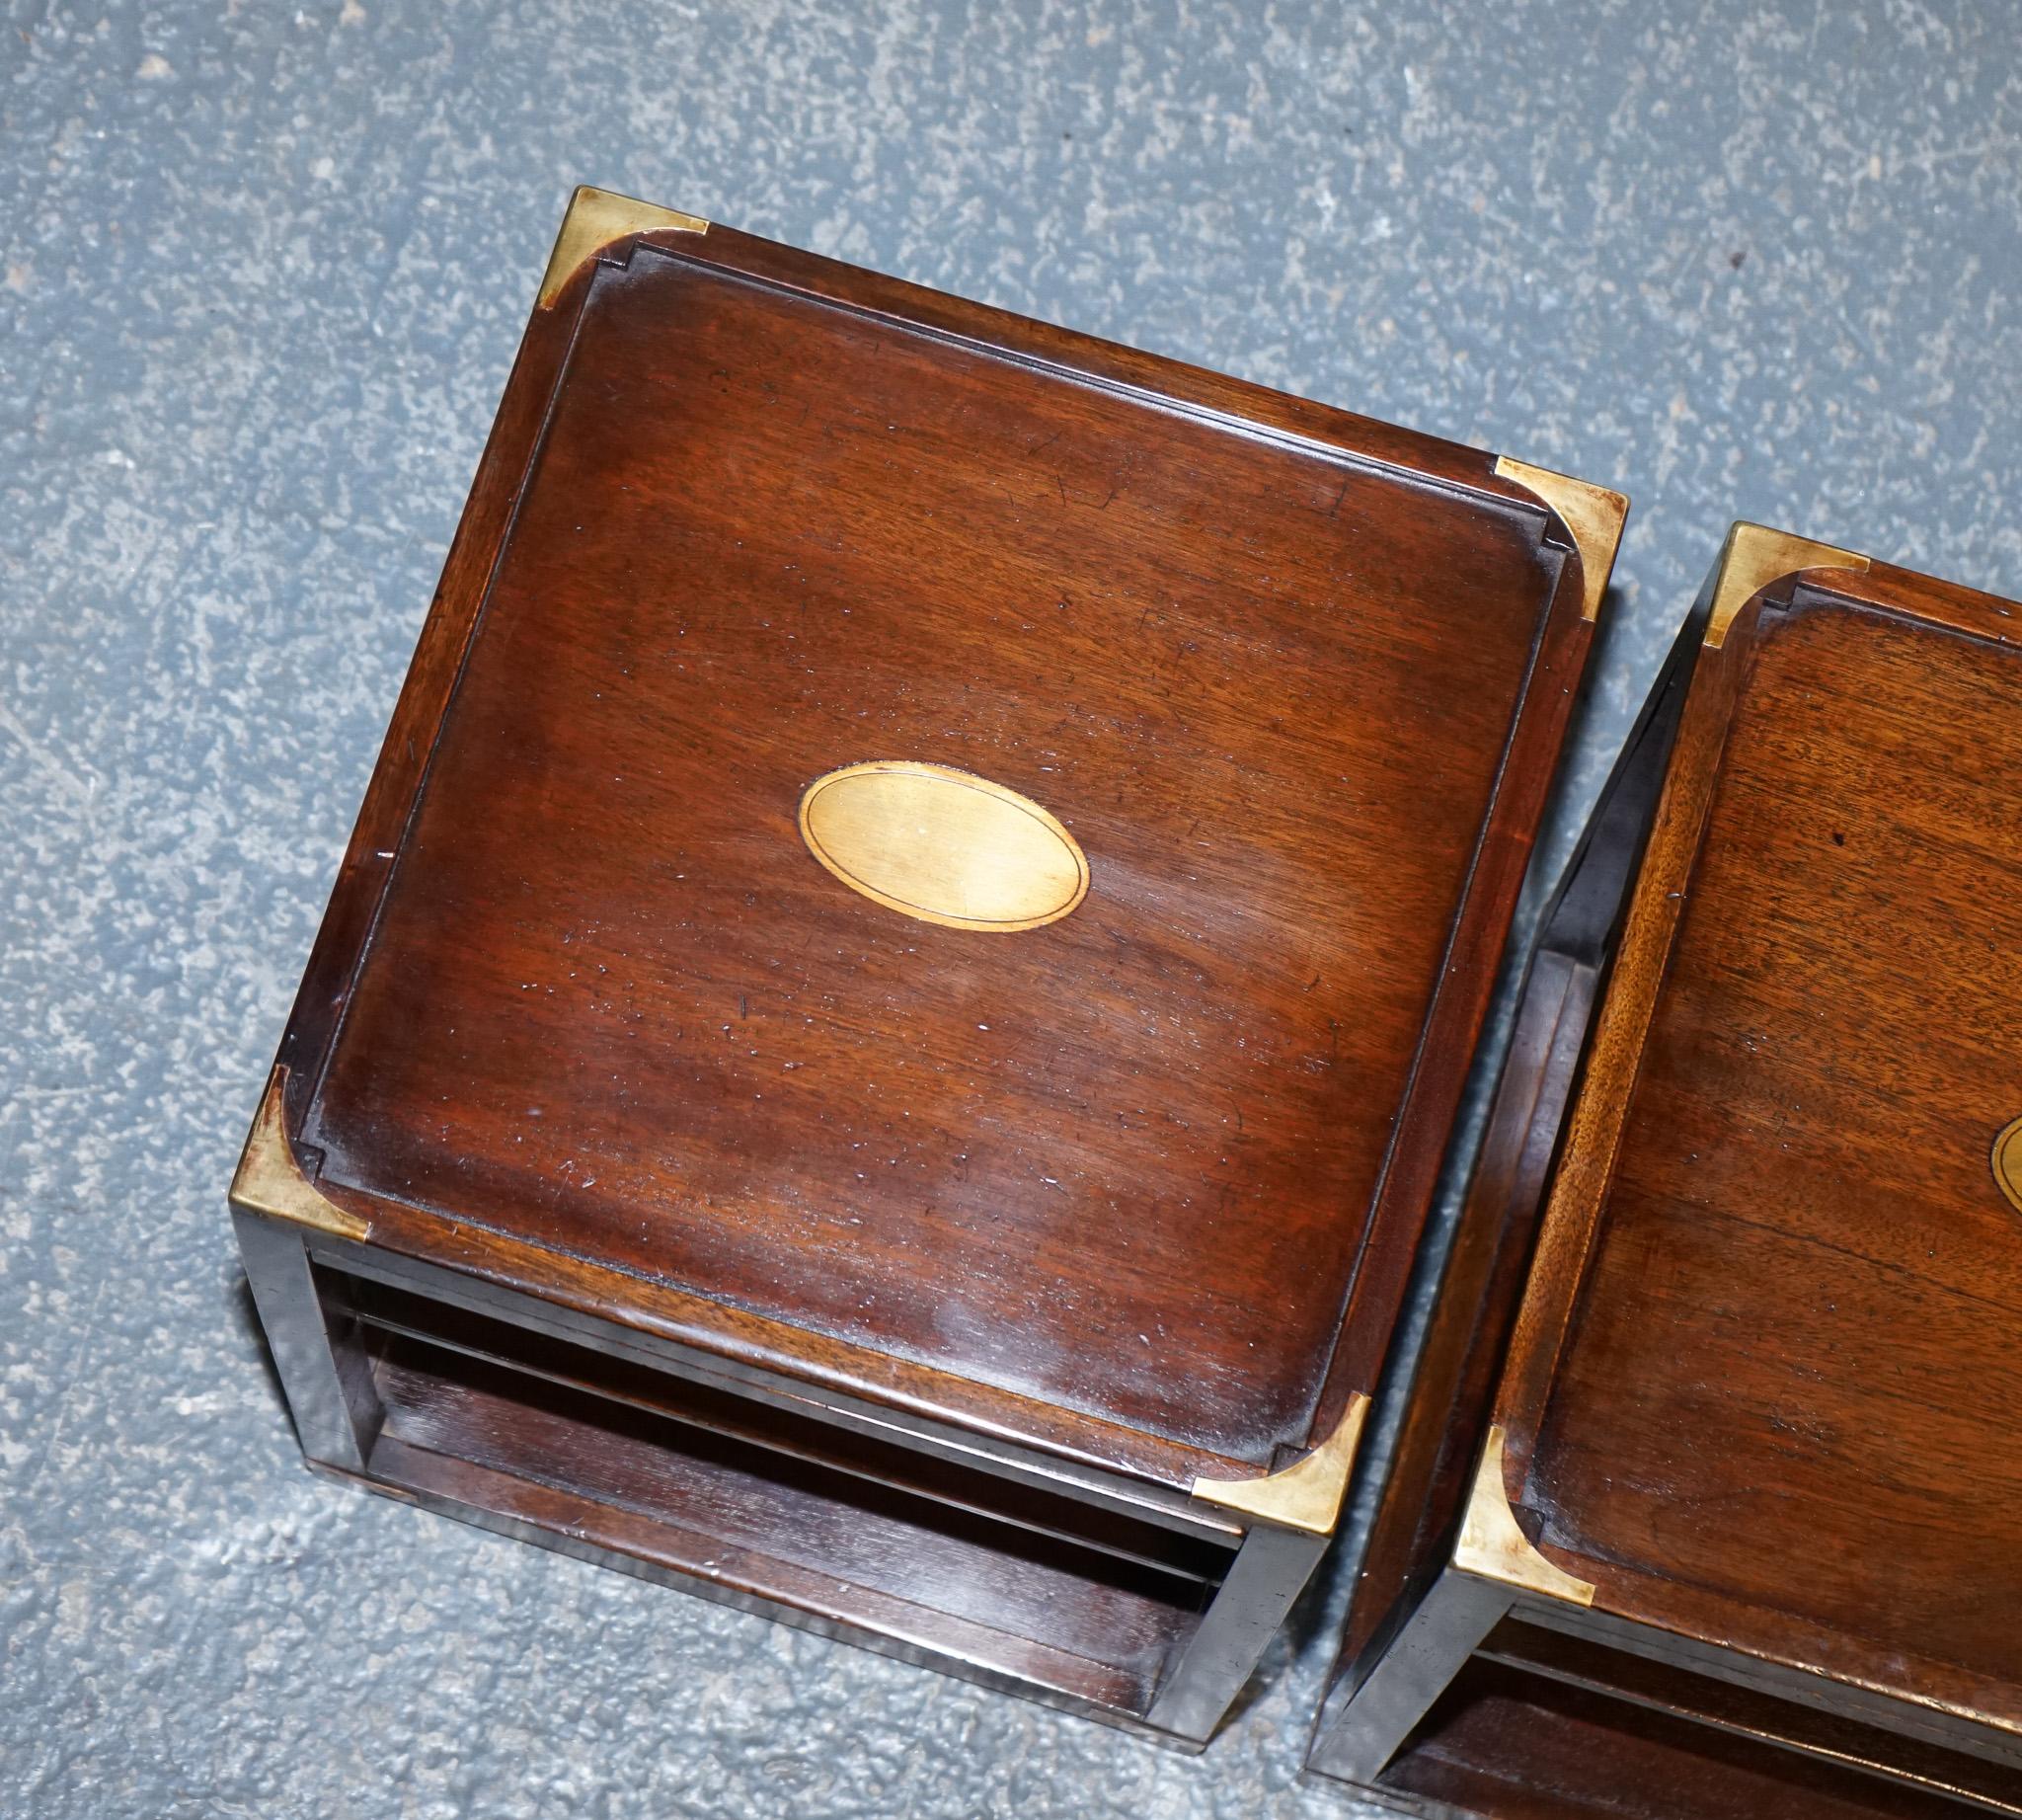 RESTORED PAiR OF HARRODS KENNEDY DOUBLE SIDED CAMPAIGN SIDE TABLES BUTLER TRAYS  1